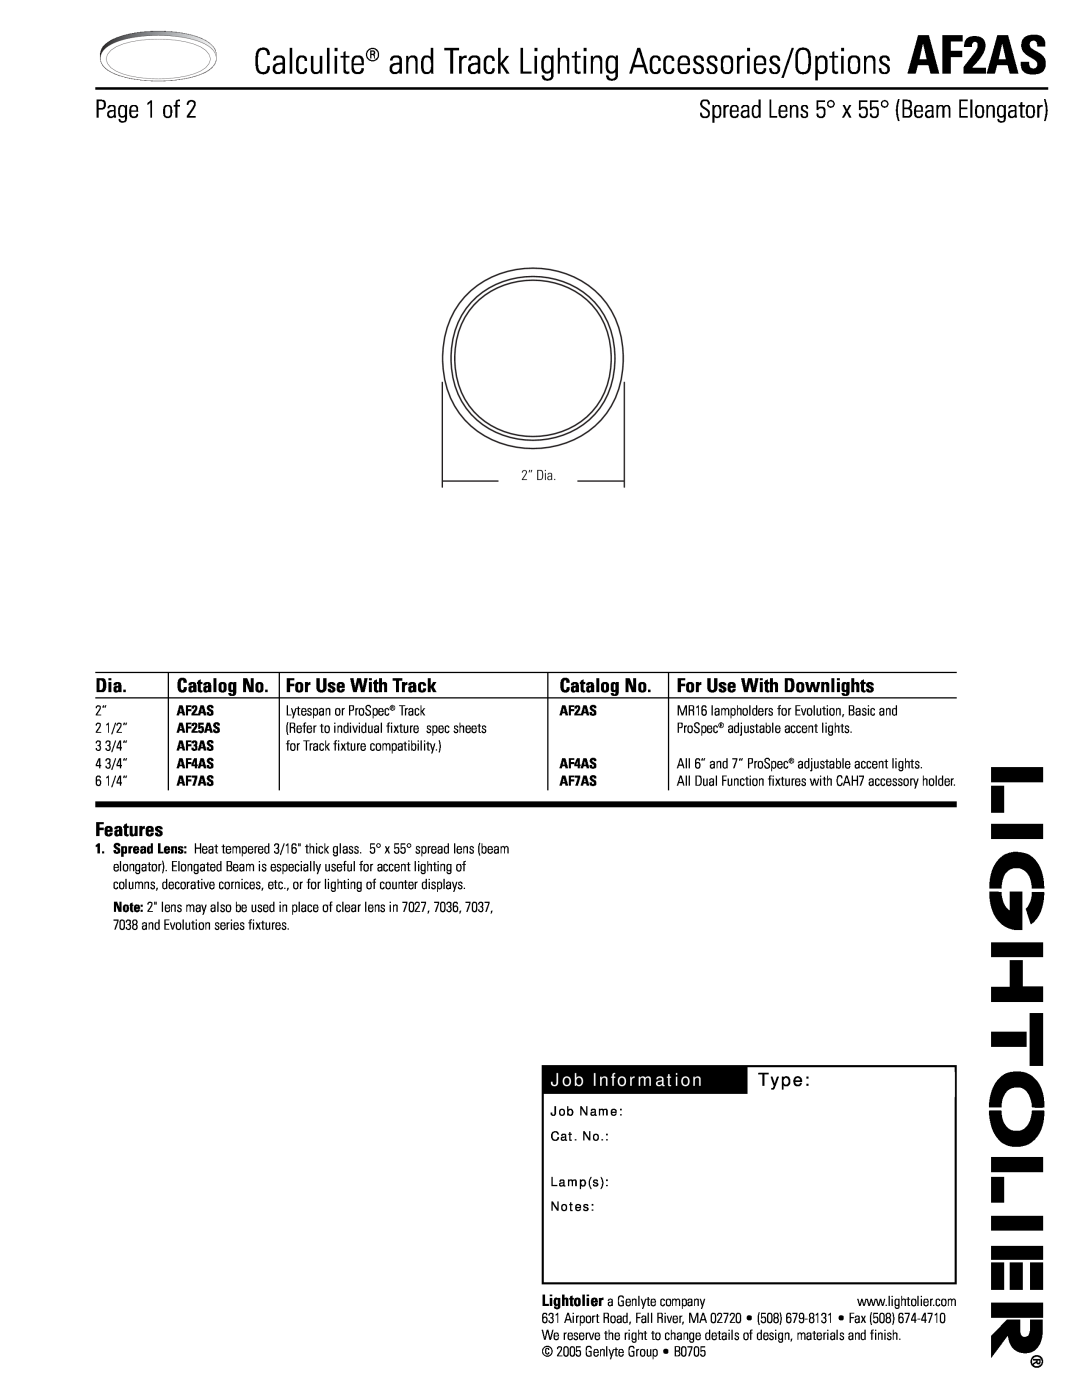 Lightolier AF2AS manual For Use With Track, Catalog No, For Use With Downlights, Features, Job Information, Type 